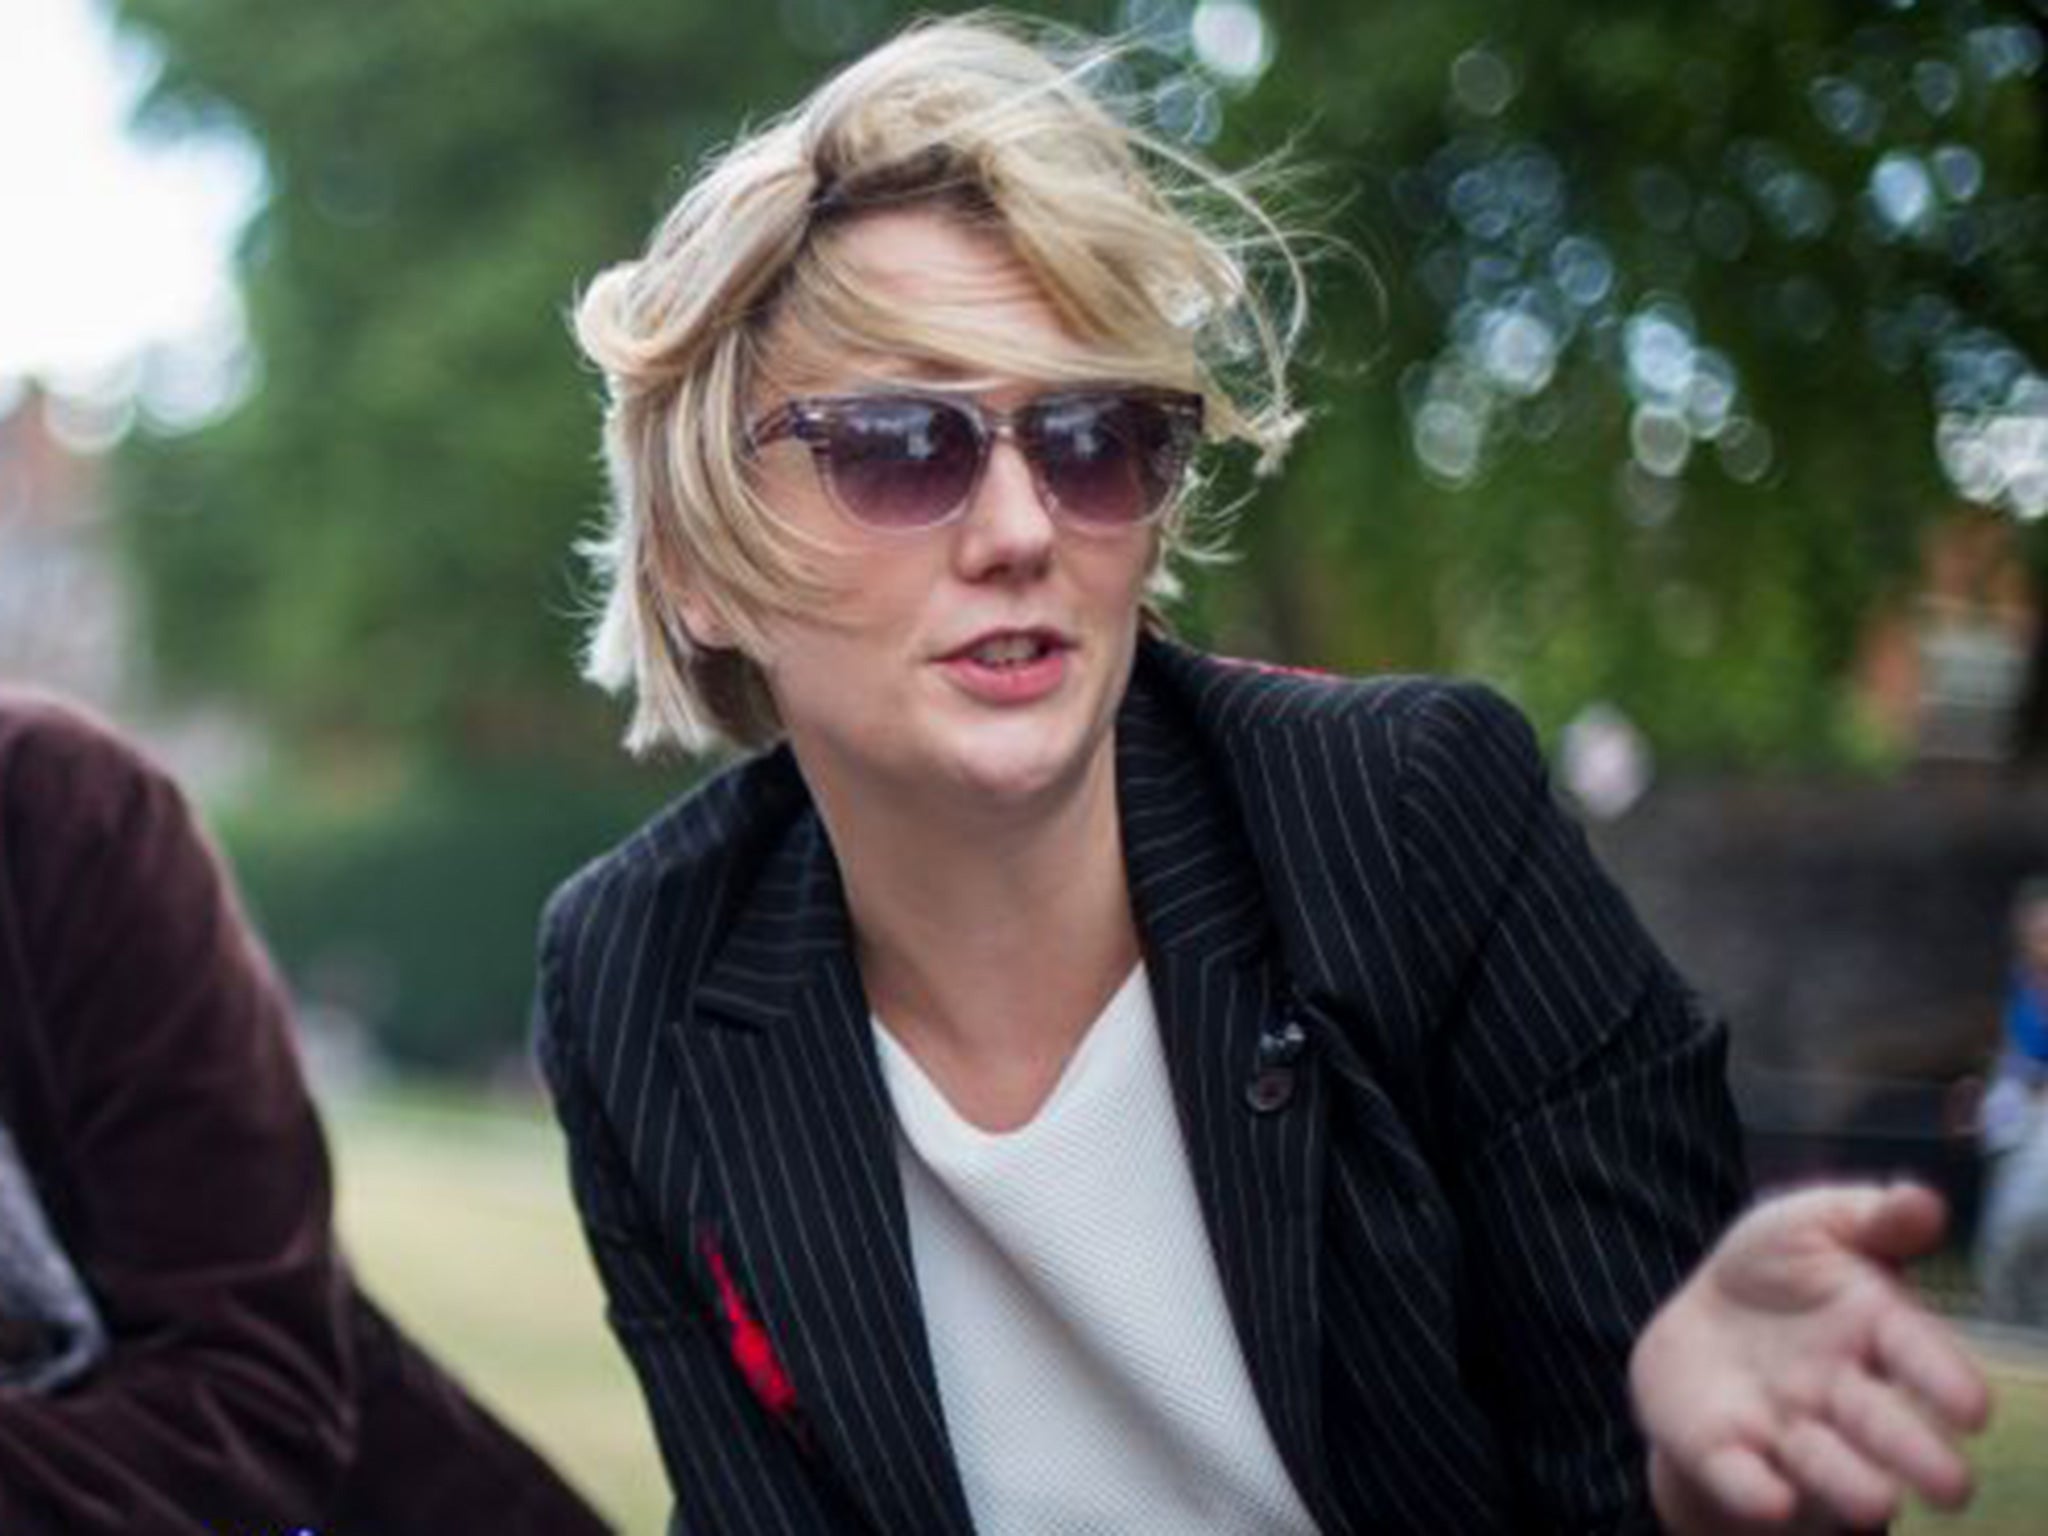 Stella Creasy, MP for Walthamstow, speaks to members of the public outside the Houses of Parliament